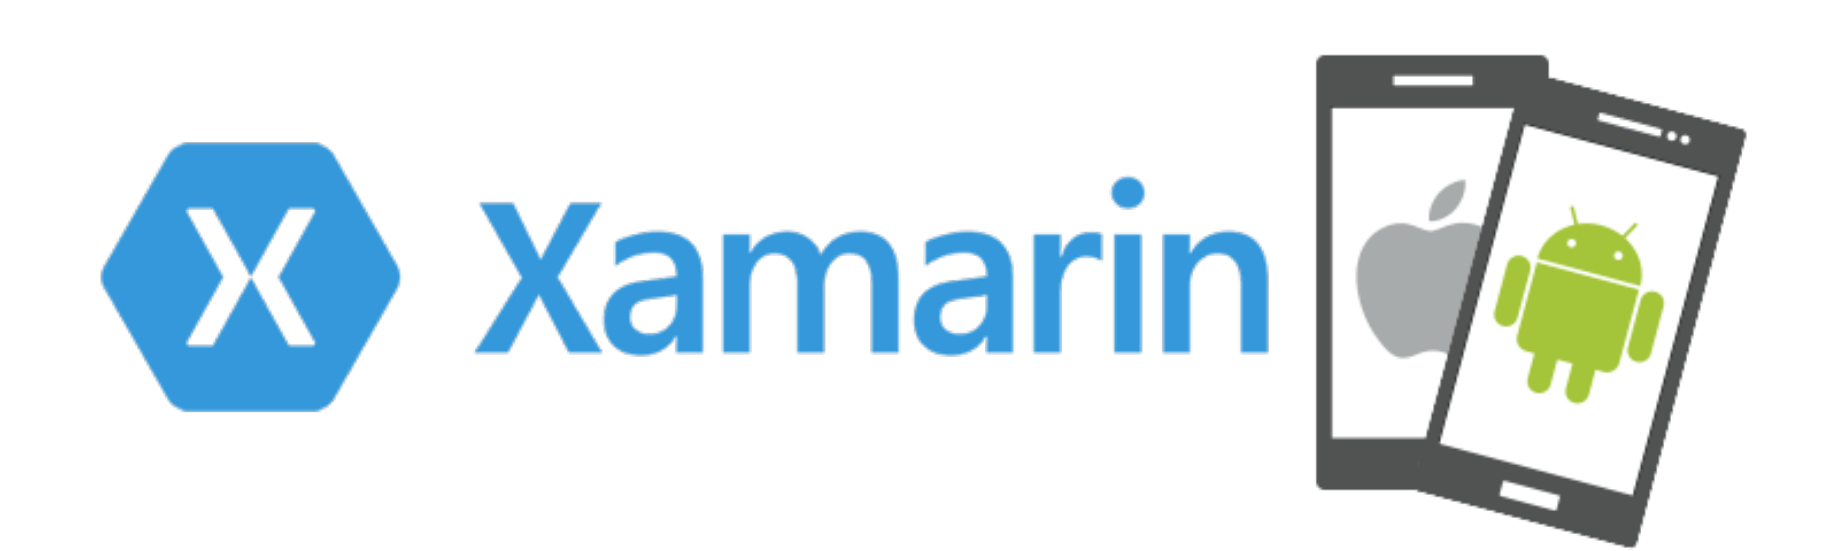 Xamarin Logo - The project XXX is missing Android SDKs required for building